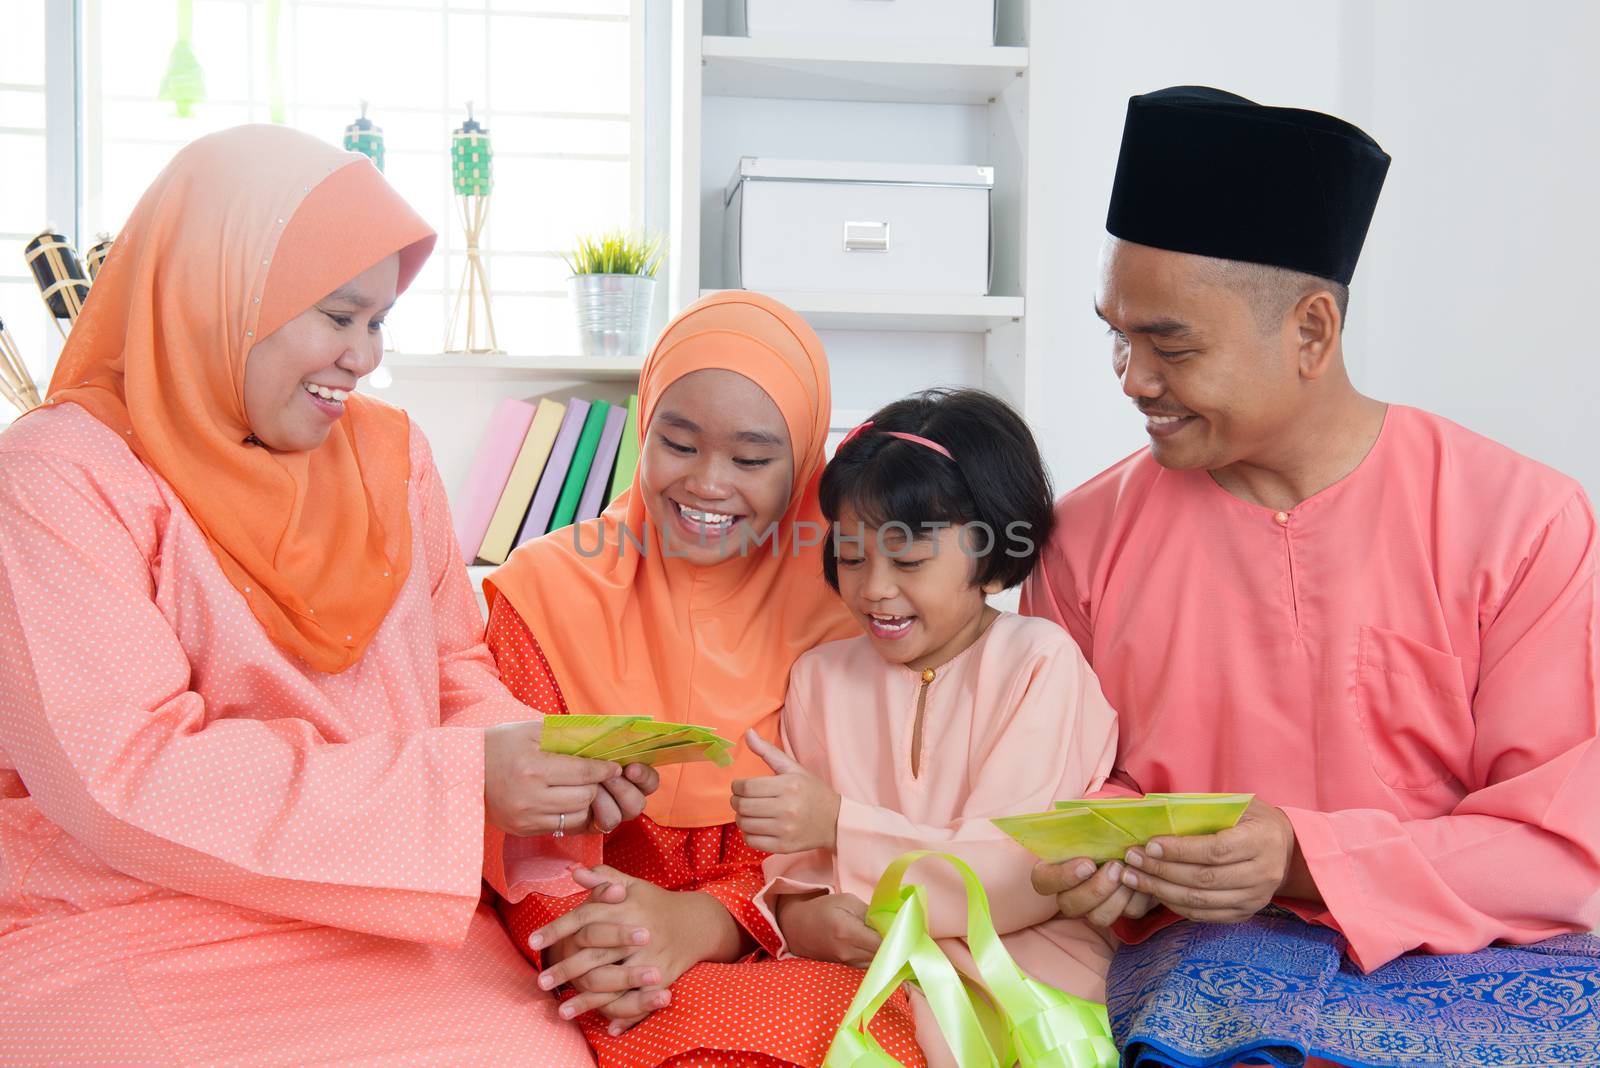 Woman giving green packet to the girls during hari raya. Malay or Malaysian family lifestyle at home.